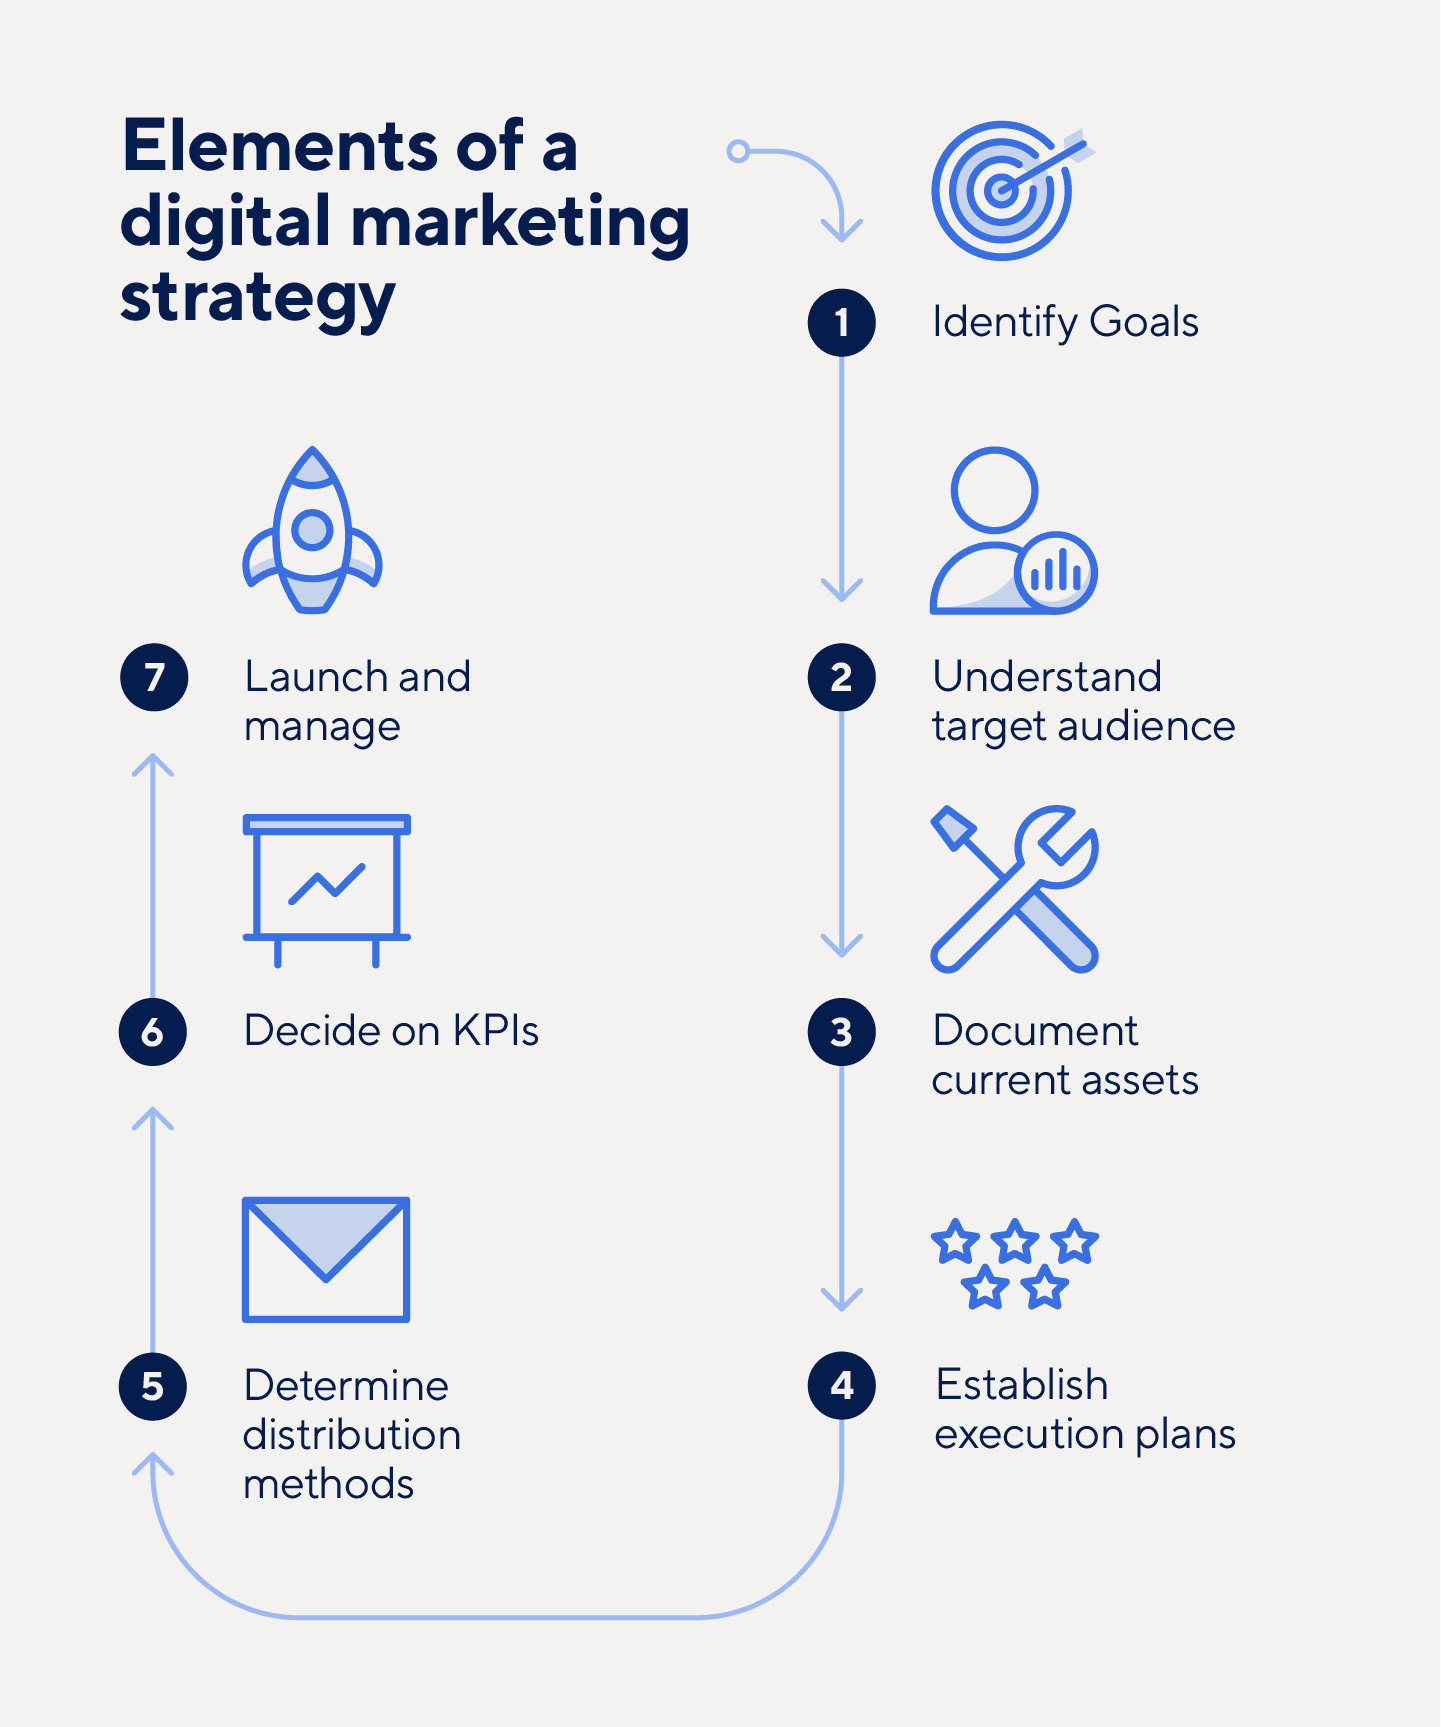 A digital marketing strategy is comprised of seven elements.